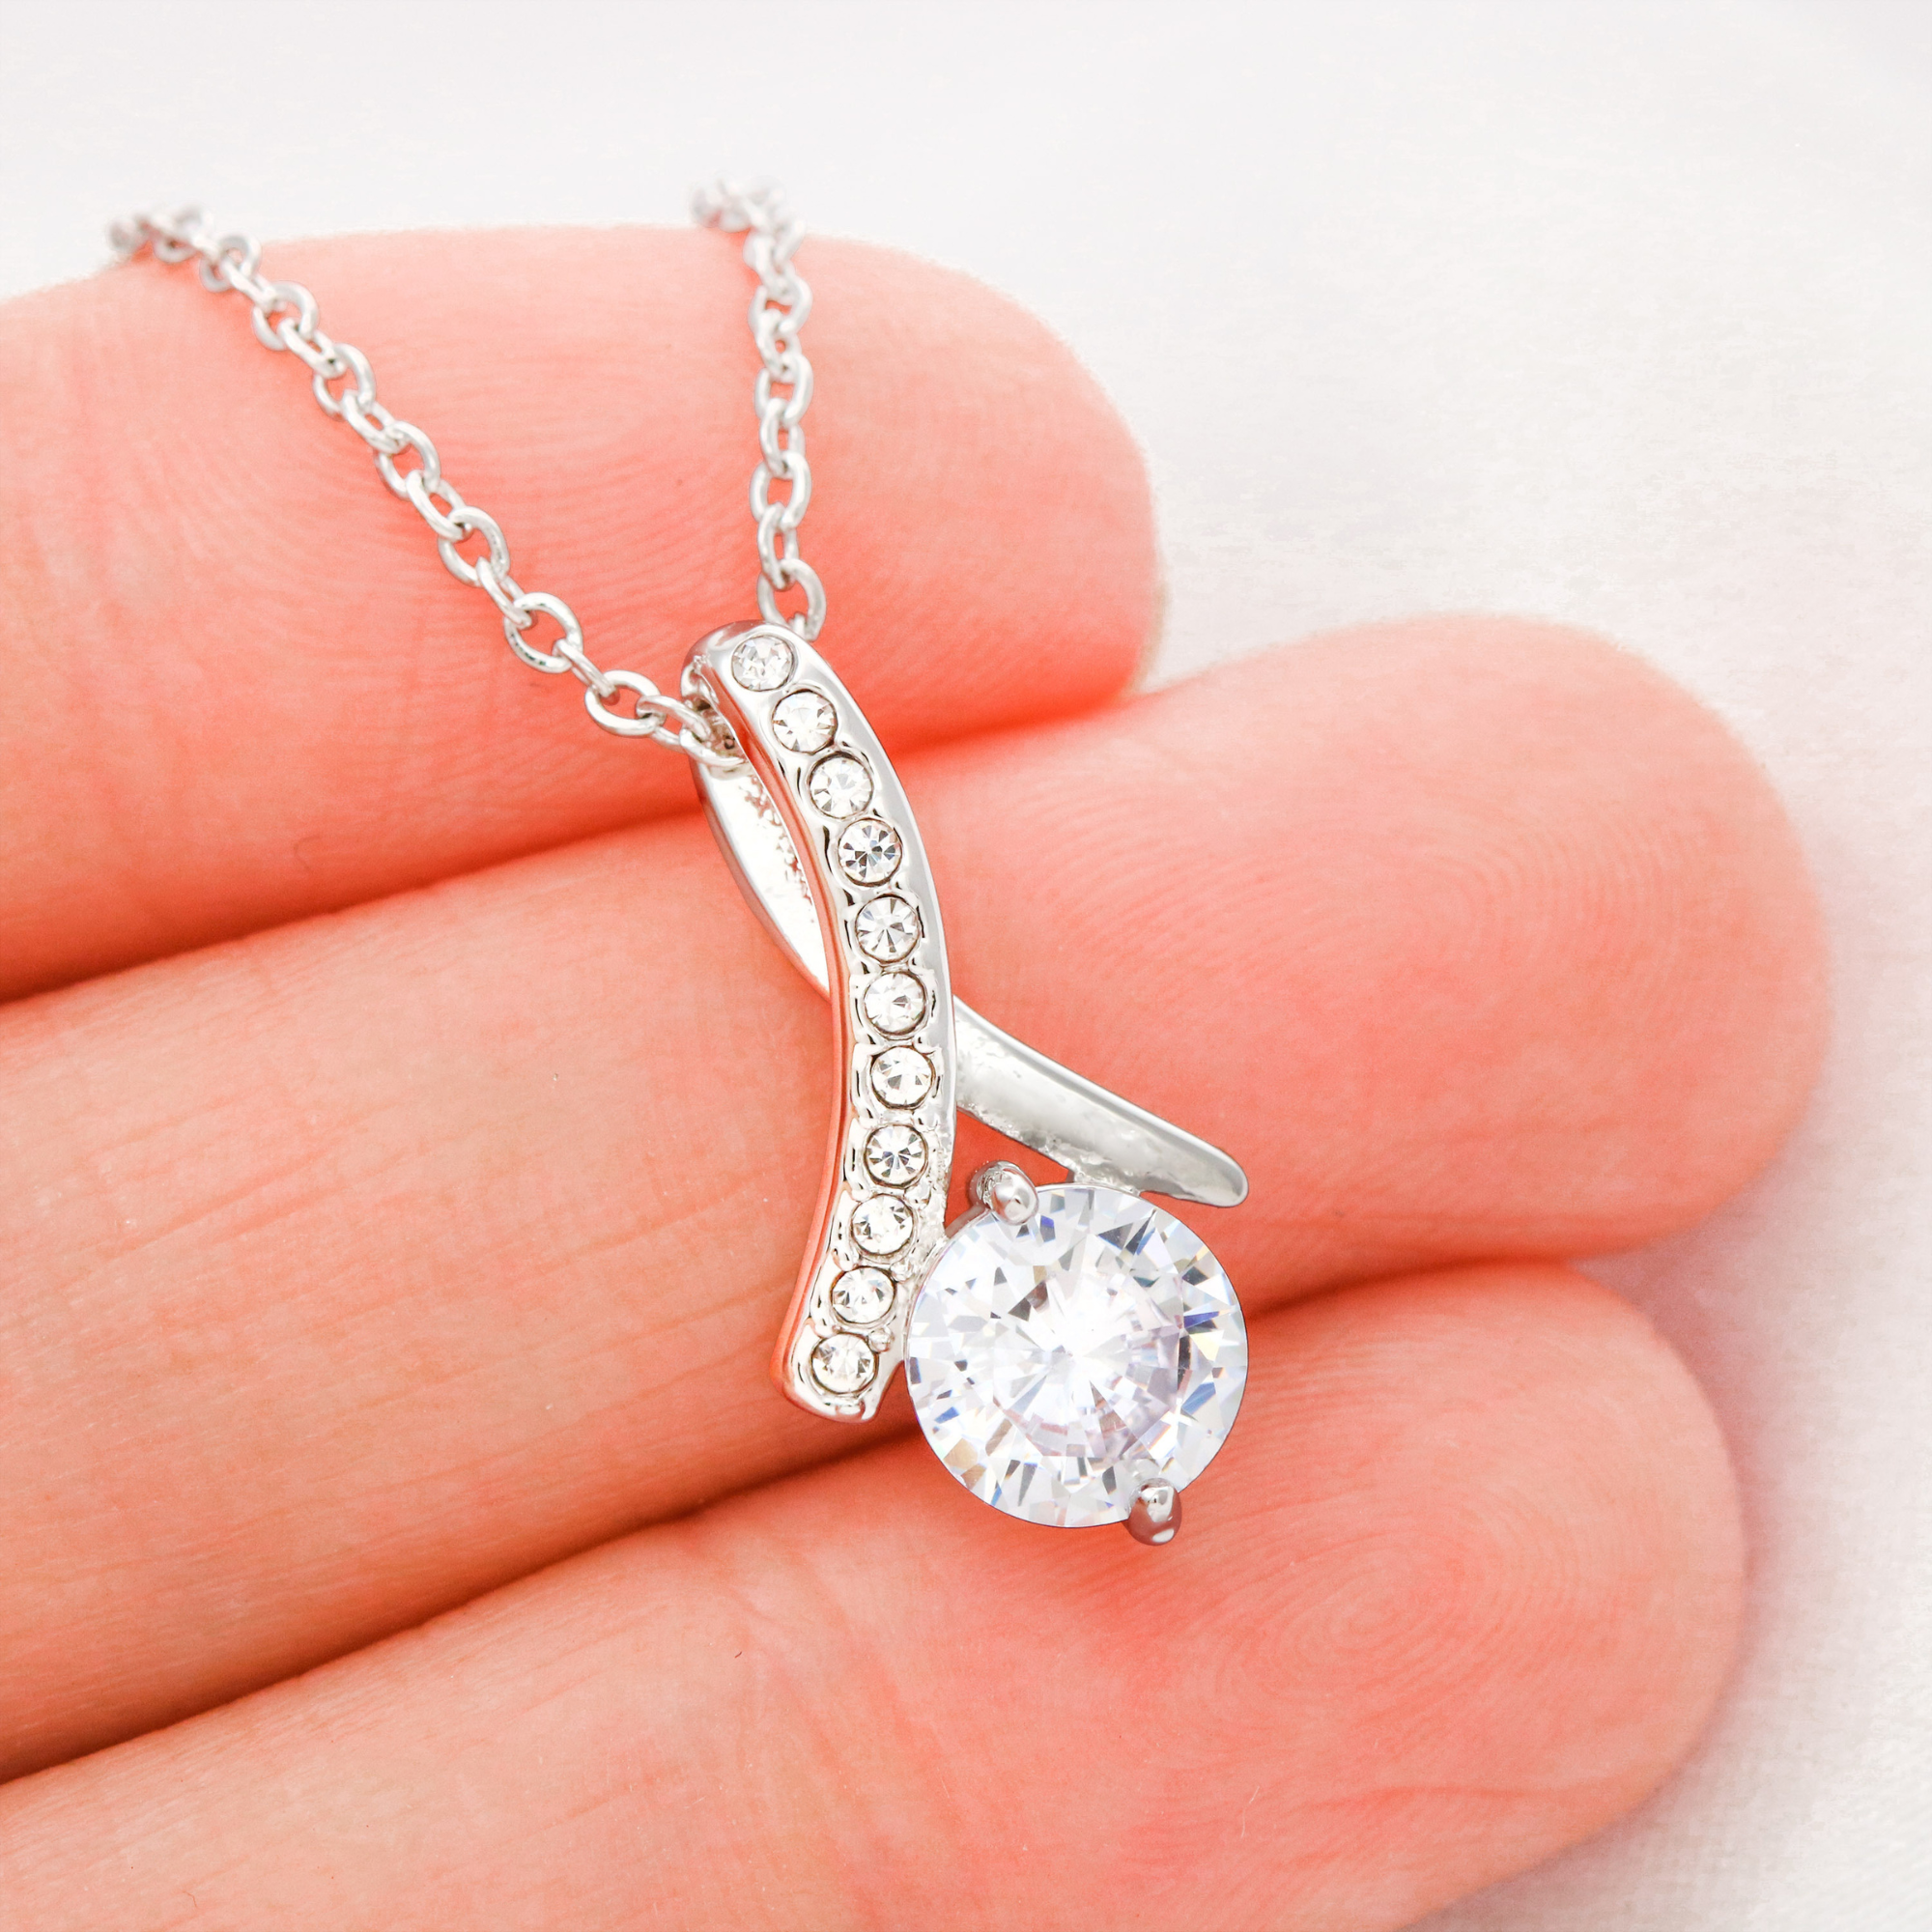 Enchanted Elegance Necklace and Cubic Zirconia Earring Set: Gift-Boxed with Heartfelt Message